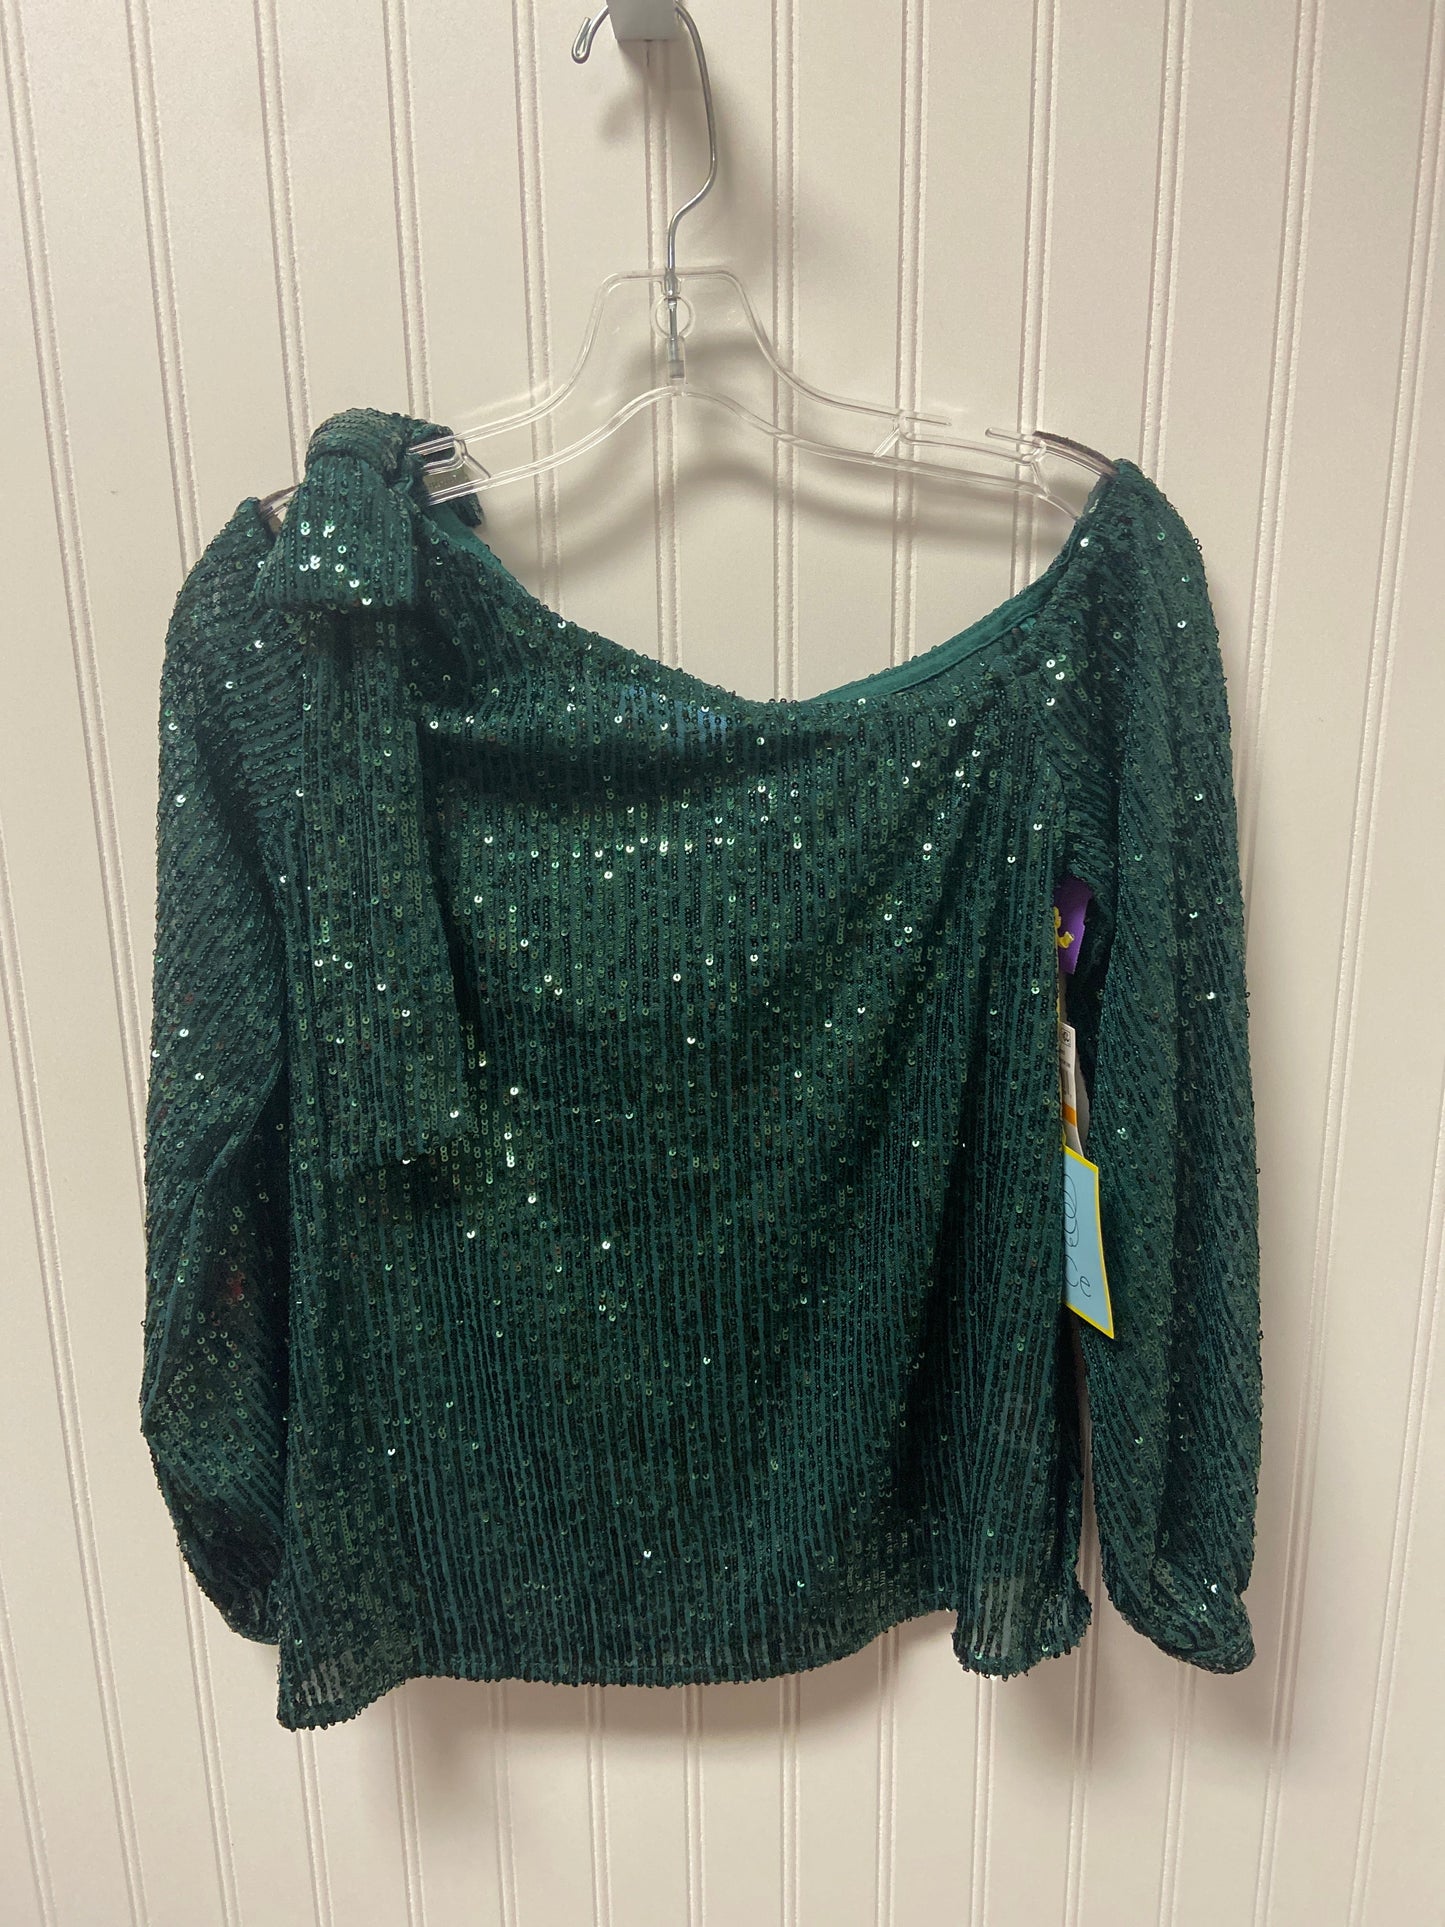 Green Top Long Sleeve Cece, Size S